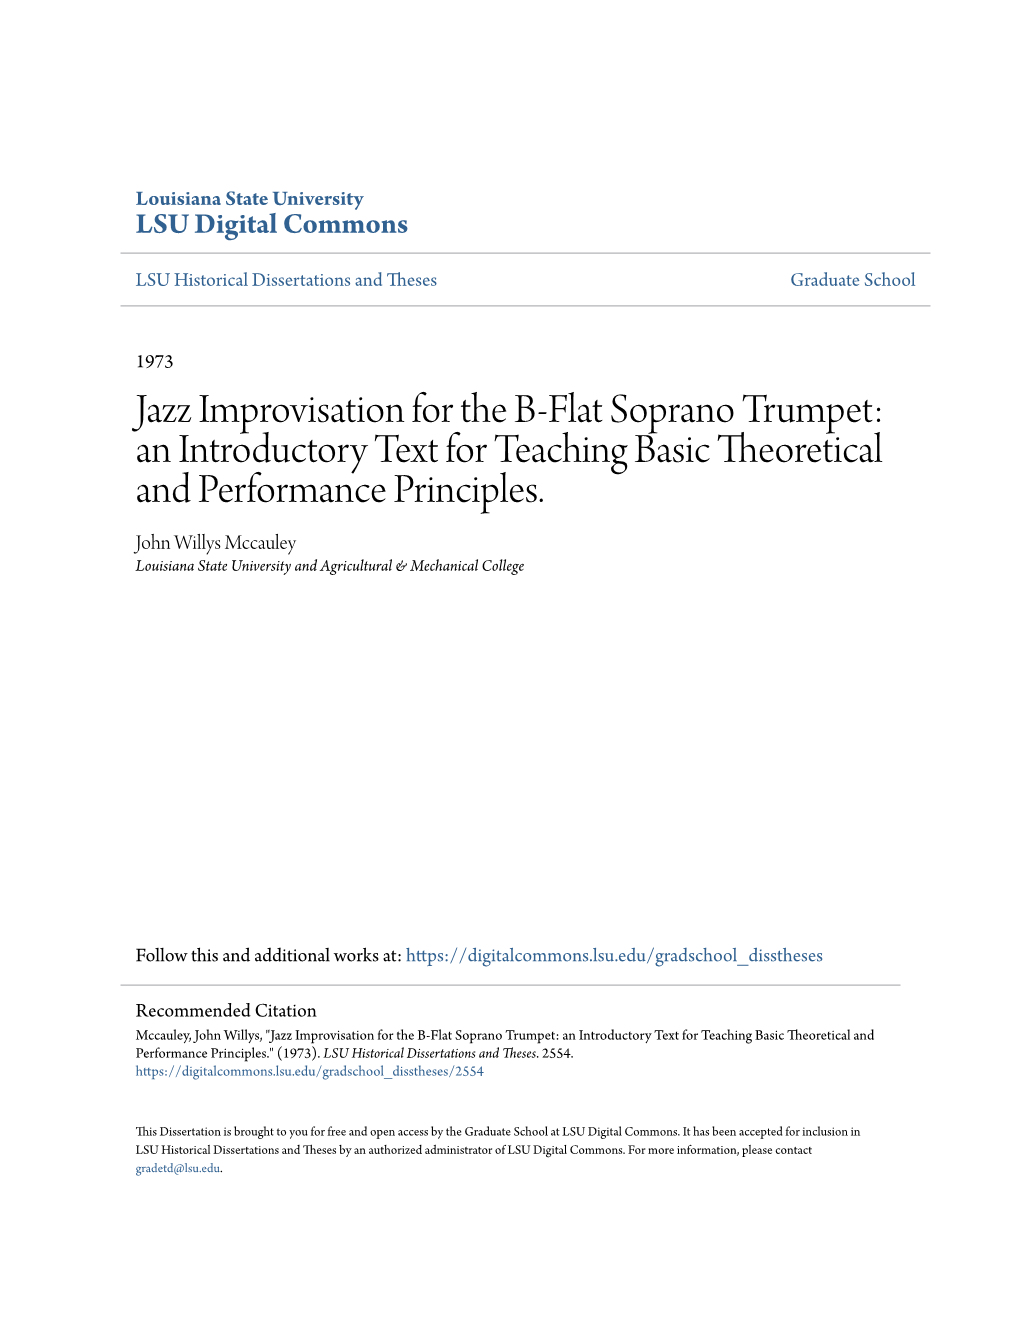 Jazz Improvisation for the B-Flat Soprano Trumpet: an Introductory Text for Teaching Basic Theoretical and Performance Principles